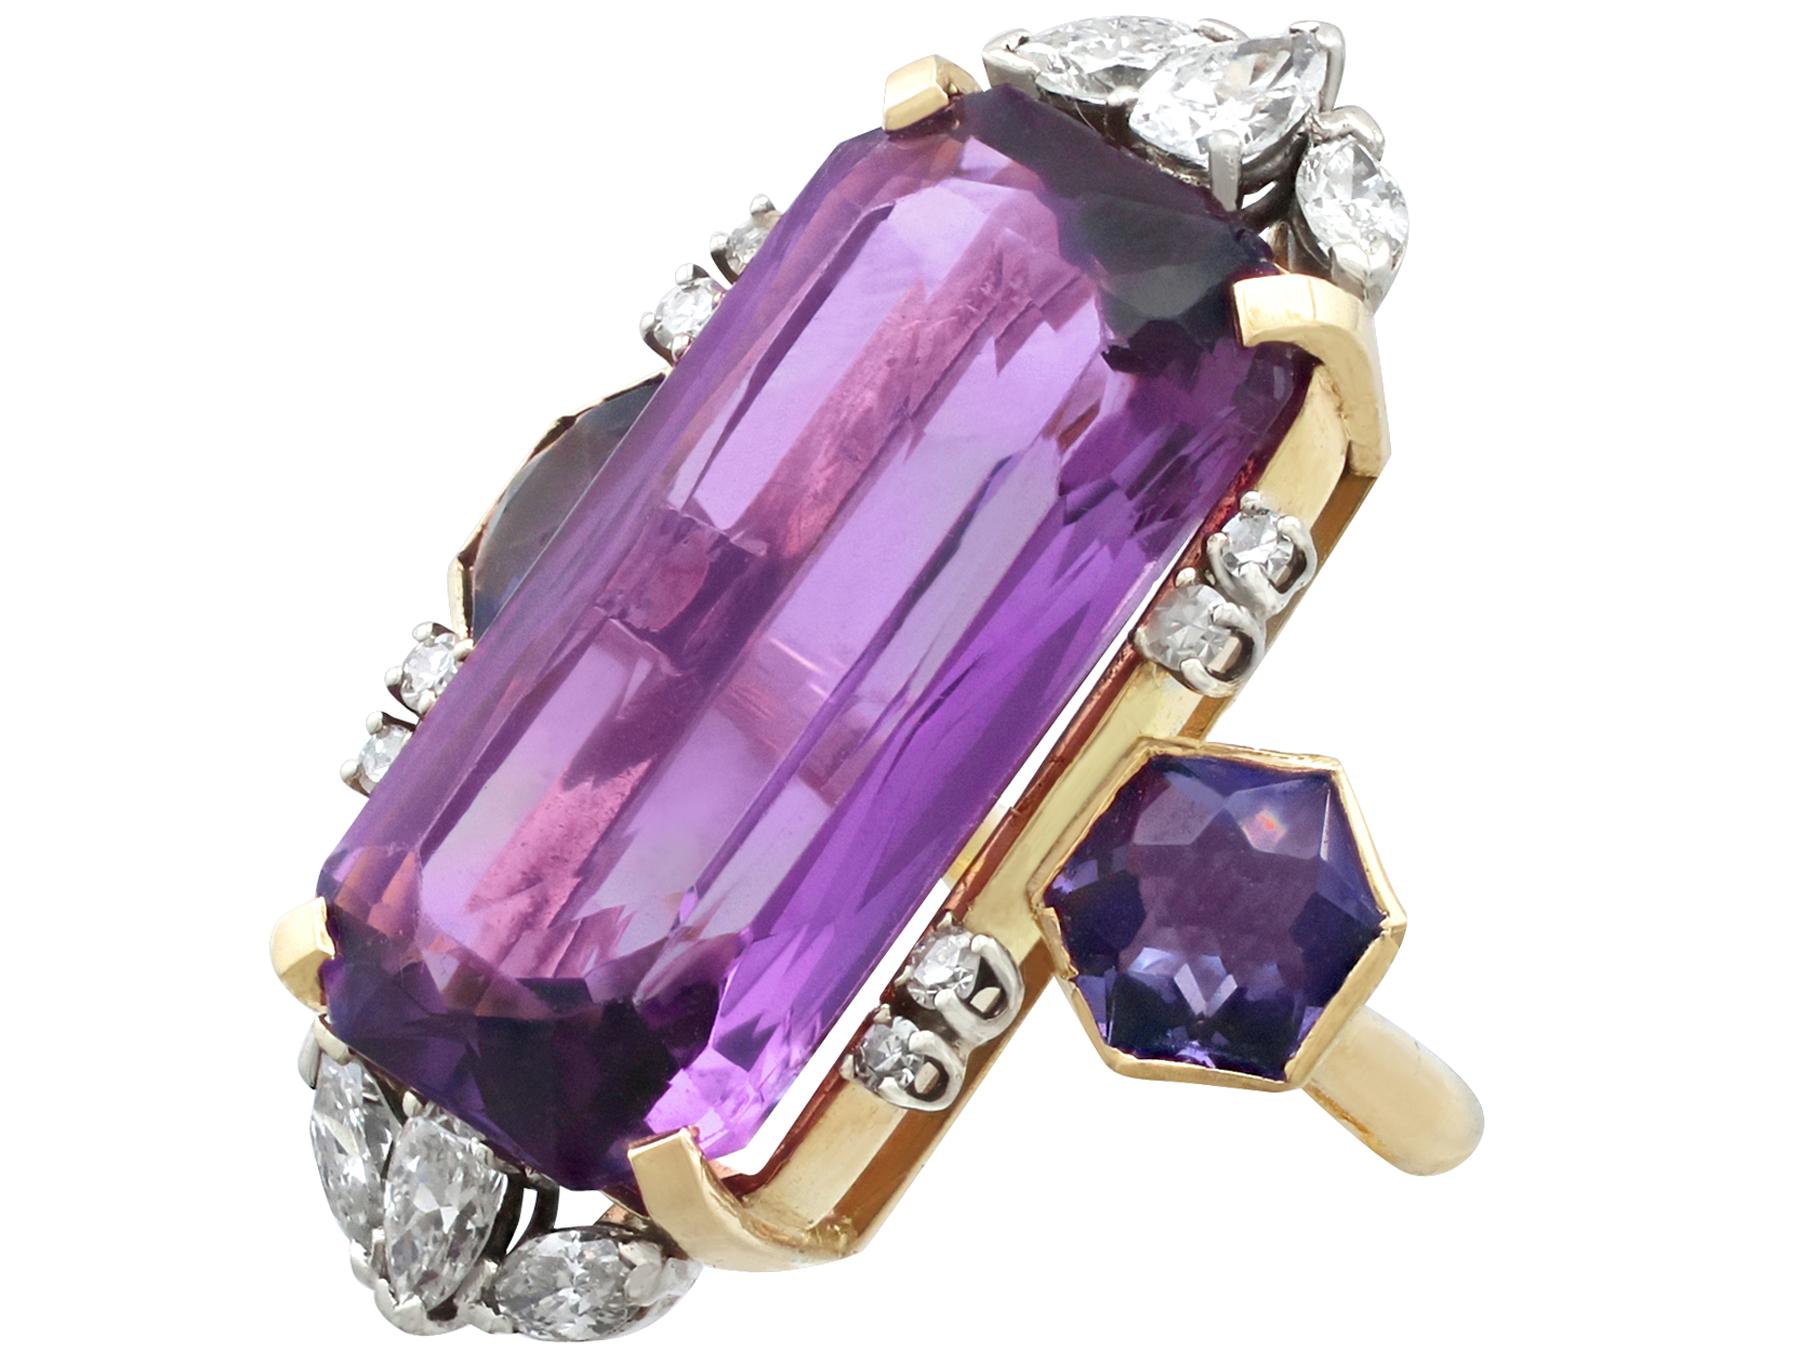 21.82 Carat Amethyst and 1.59 Carat Diamonds Gold Cocktail Ring In Excellent Condition For Sale In Jesmond, Newcastle Upon Tyne